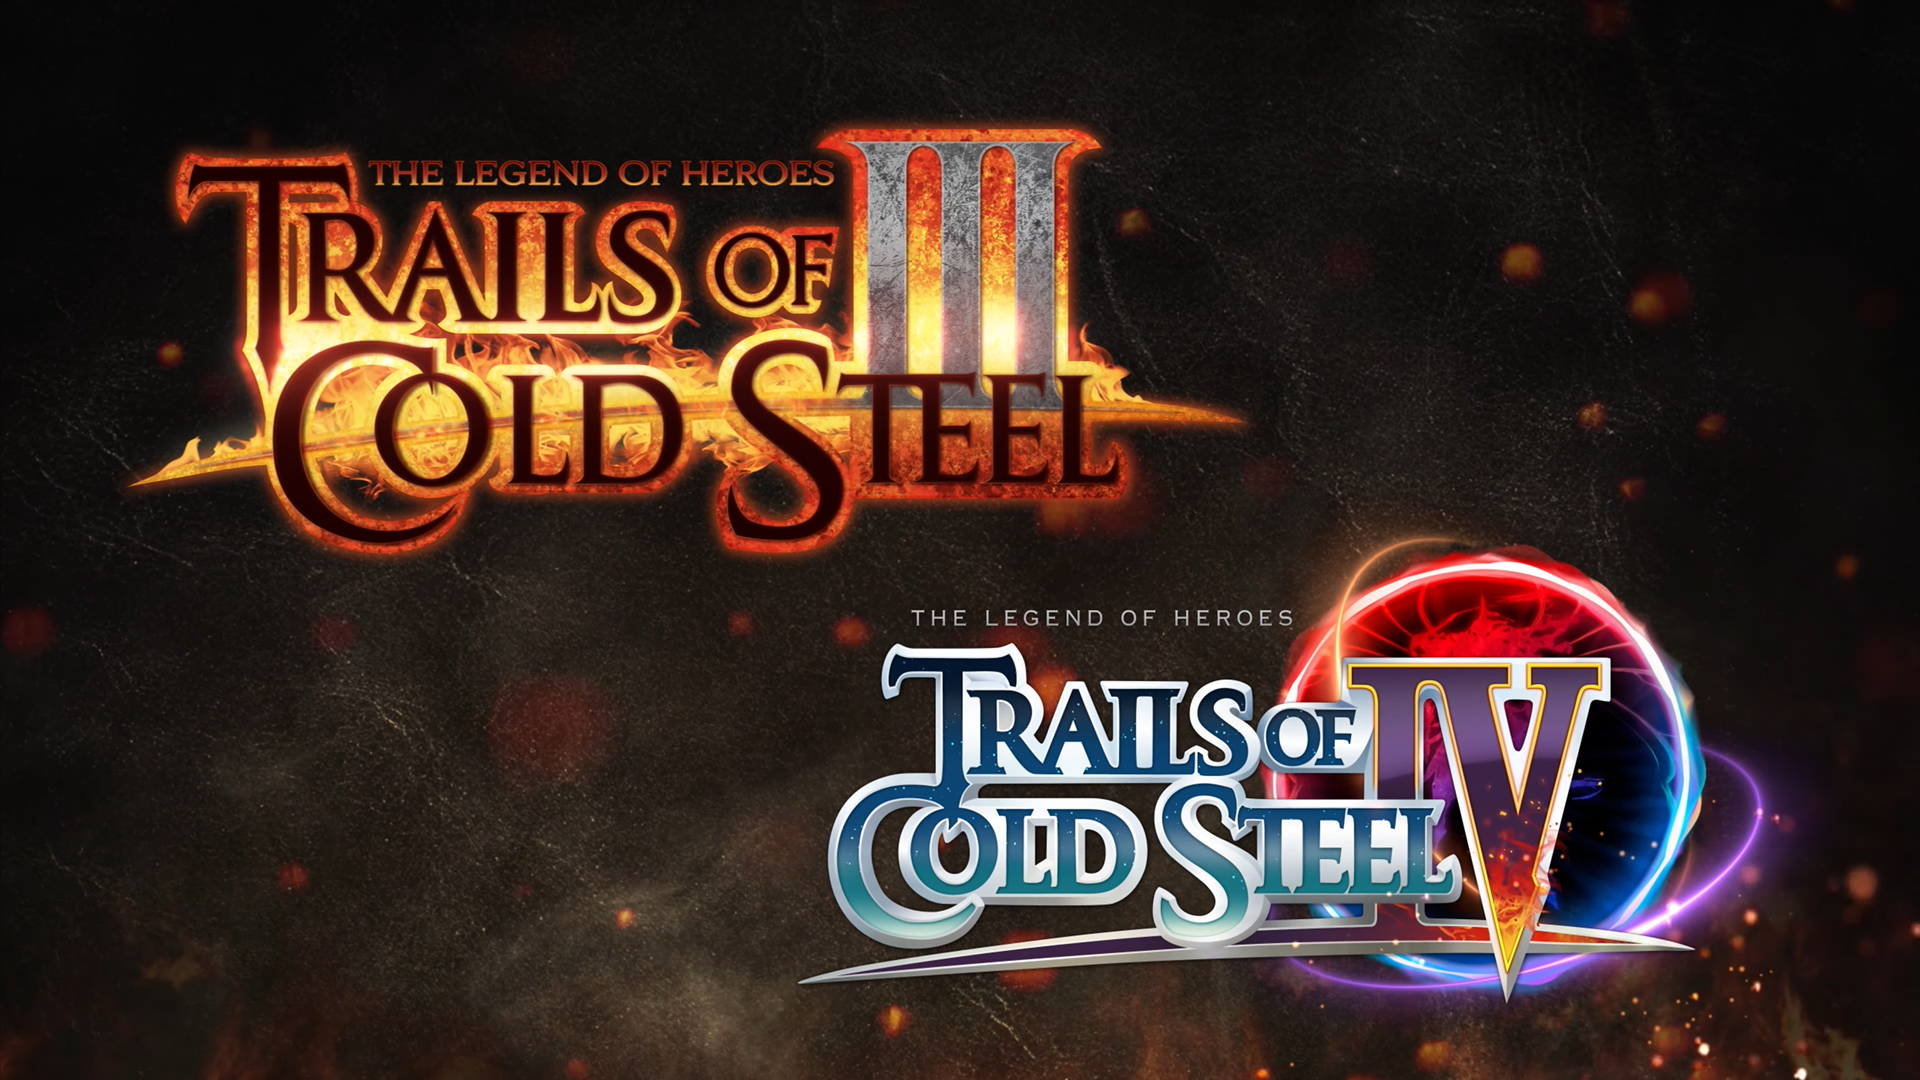 The Legend of Heroes: Trails of Cold Steel III + IV is Out Now on PS5®!